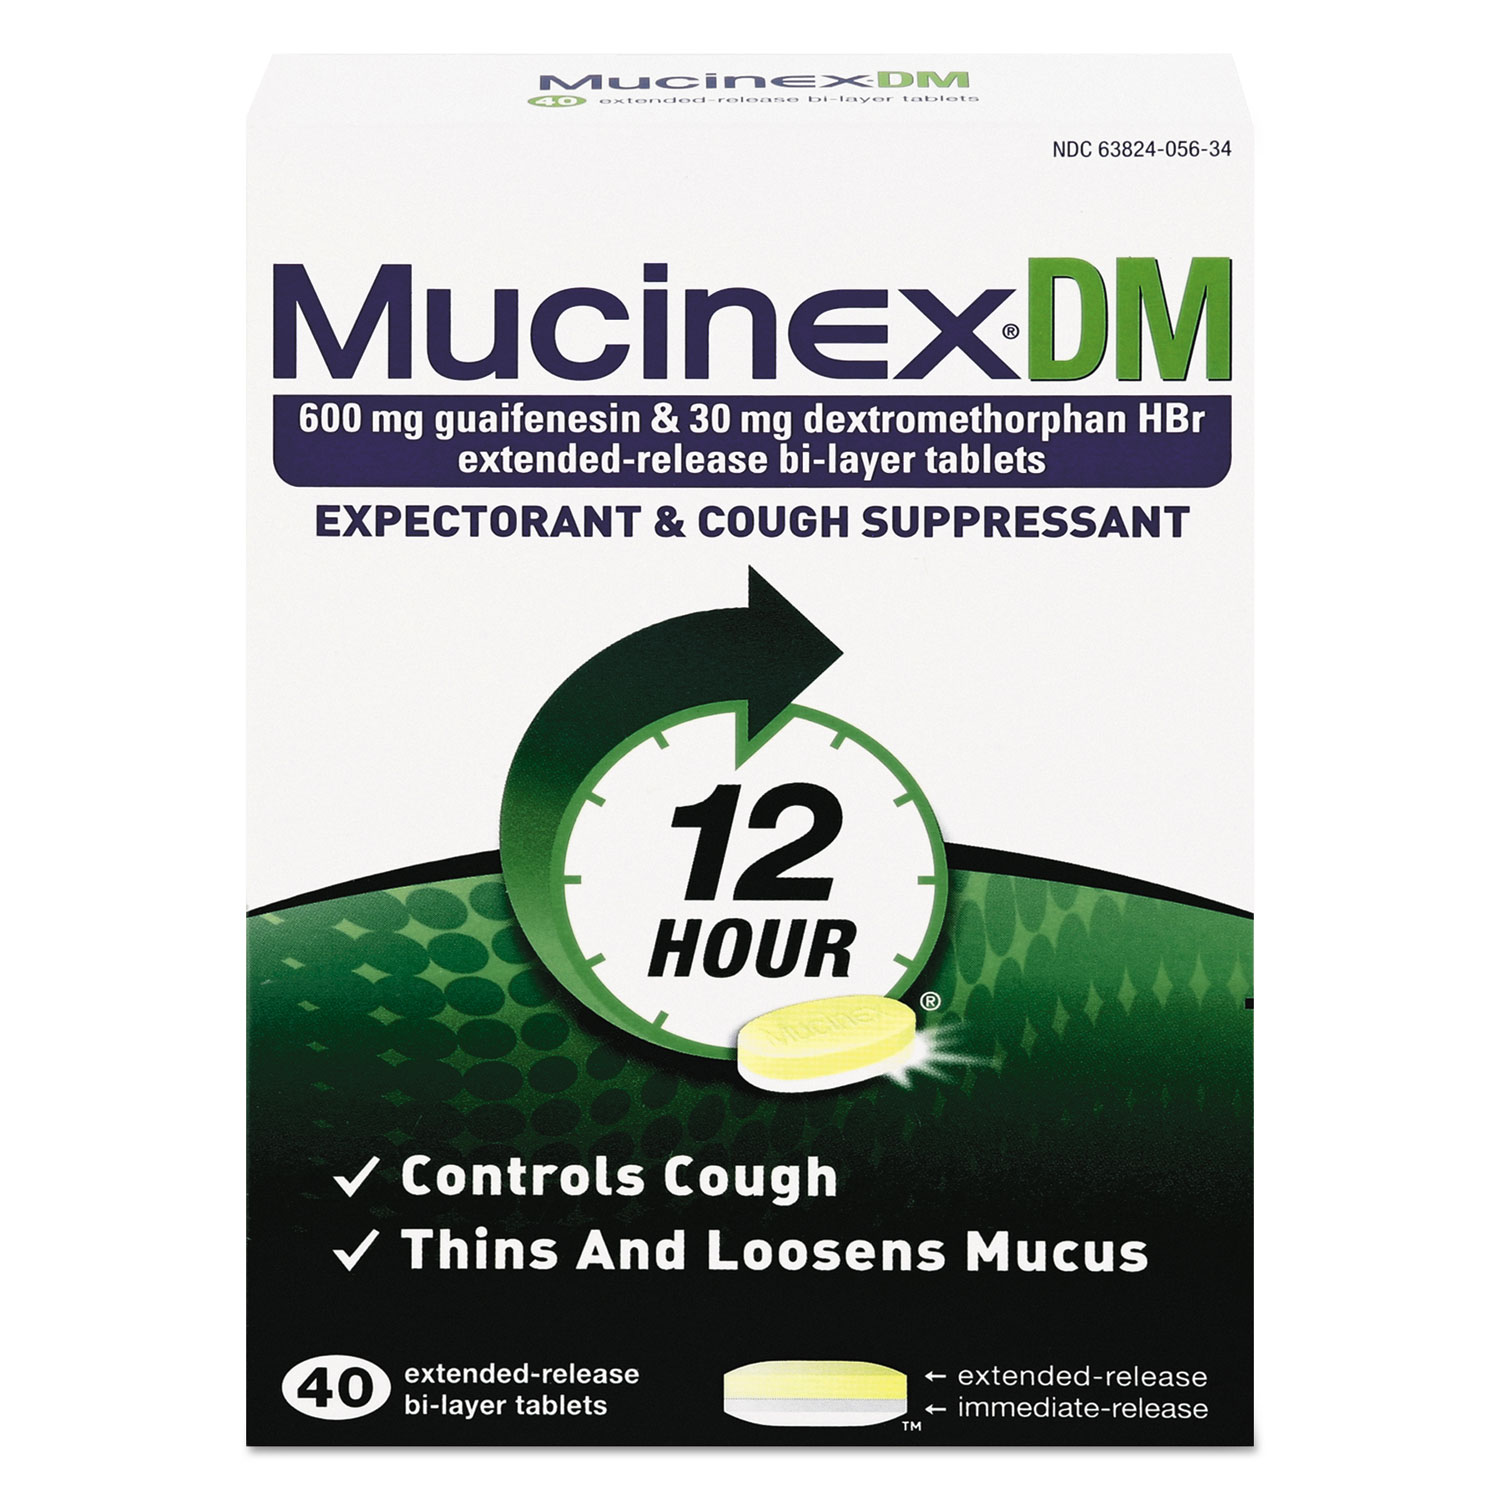  Mucinex 63824-05640 DM Expectorant and Cough Suppressant, 40 Tablets/Box (RAC05640) 